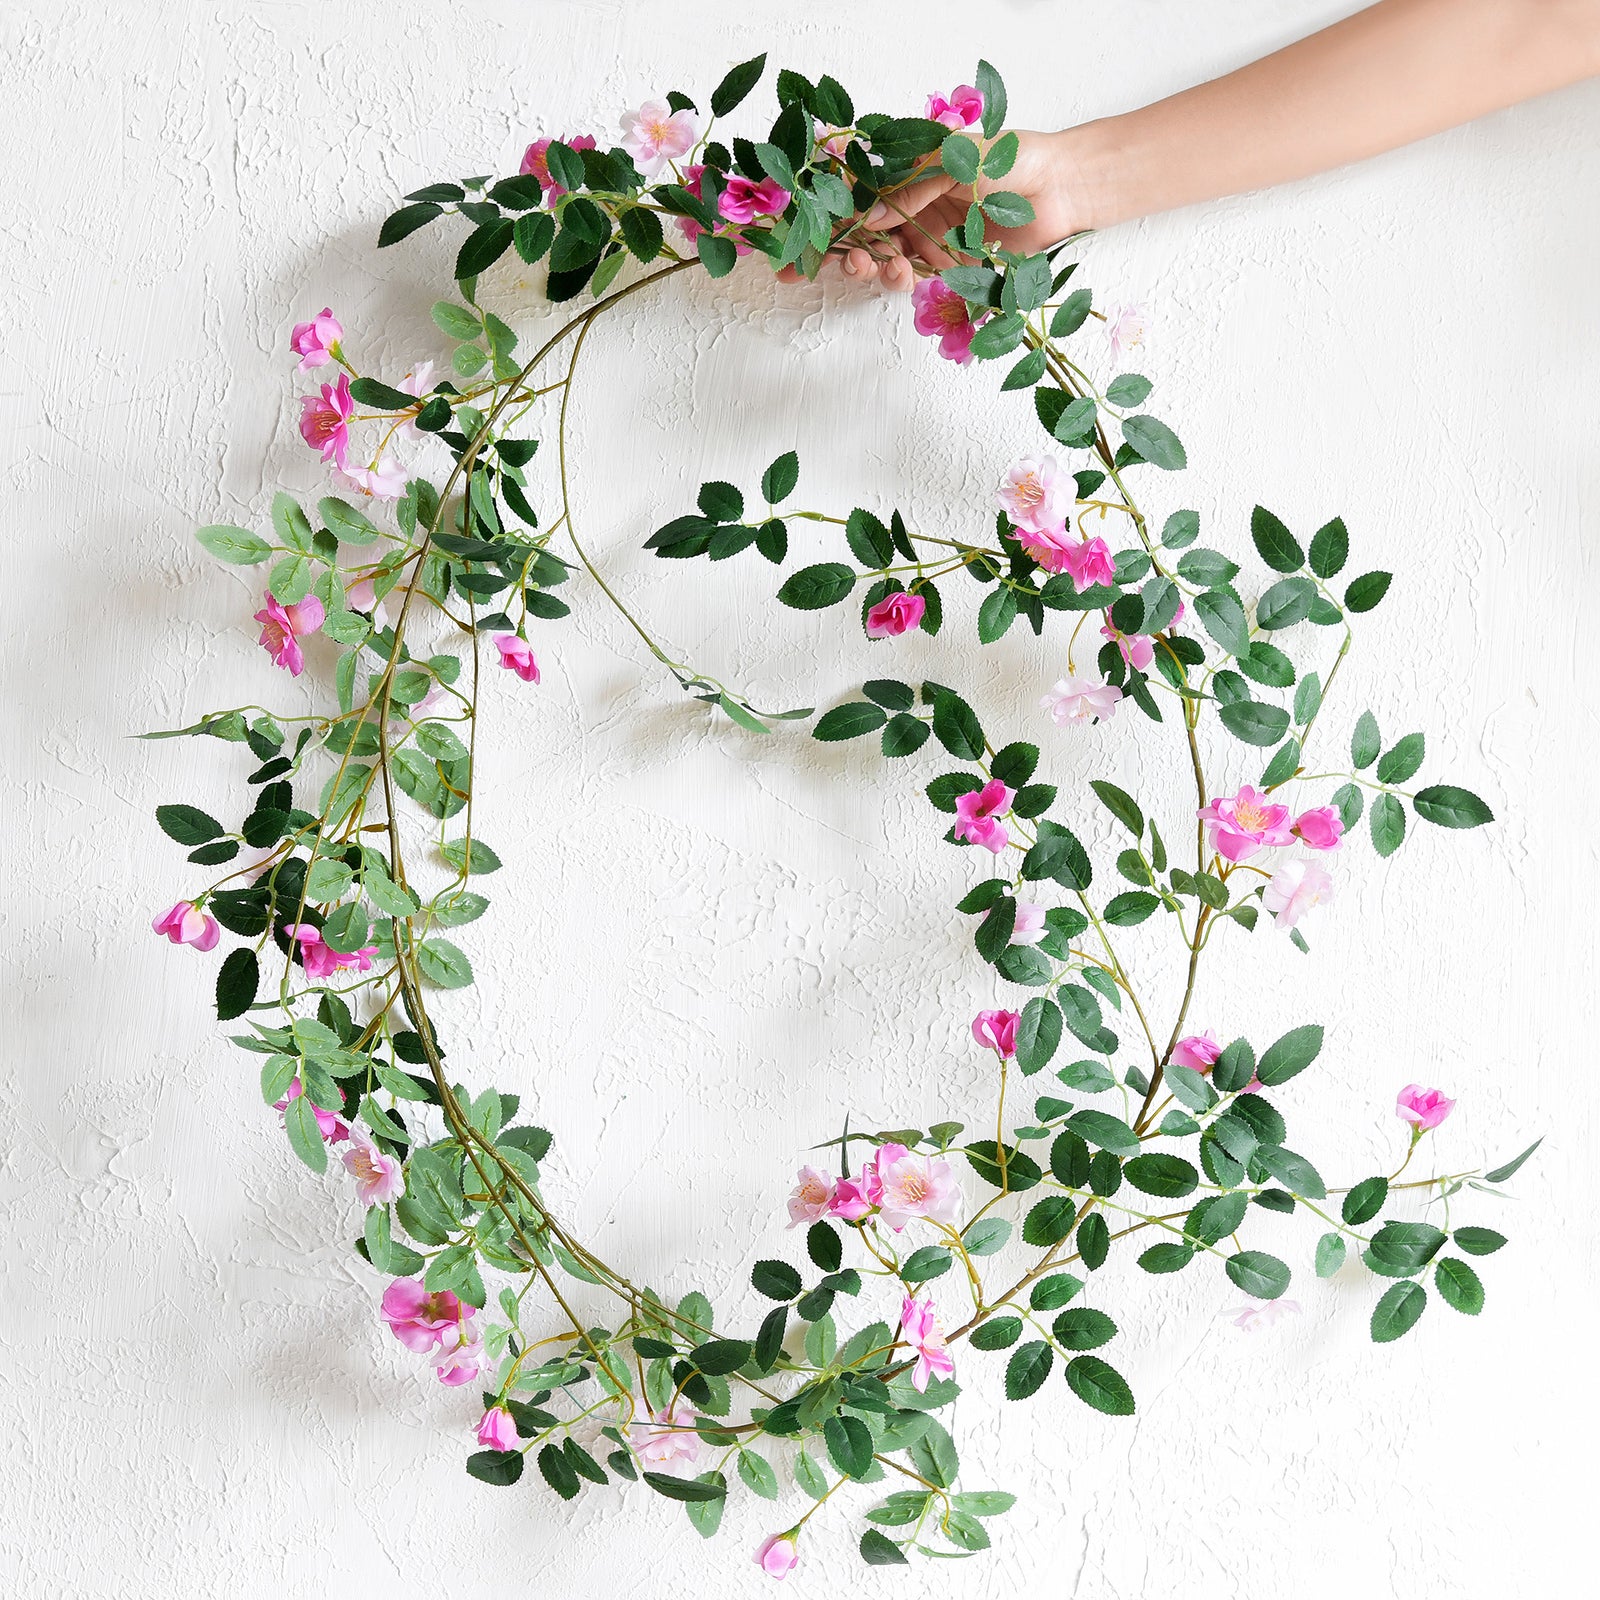 12ft 2 Bendable Flower Fuchsia Pink Garlands Artificial Silk Wild Rose Vine Leaves Hanging Flowers for Wall Decoration